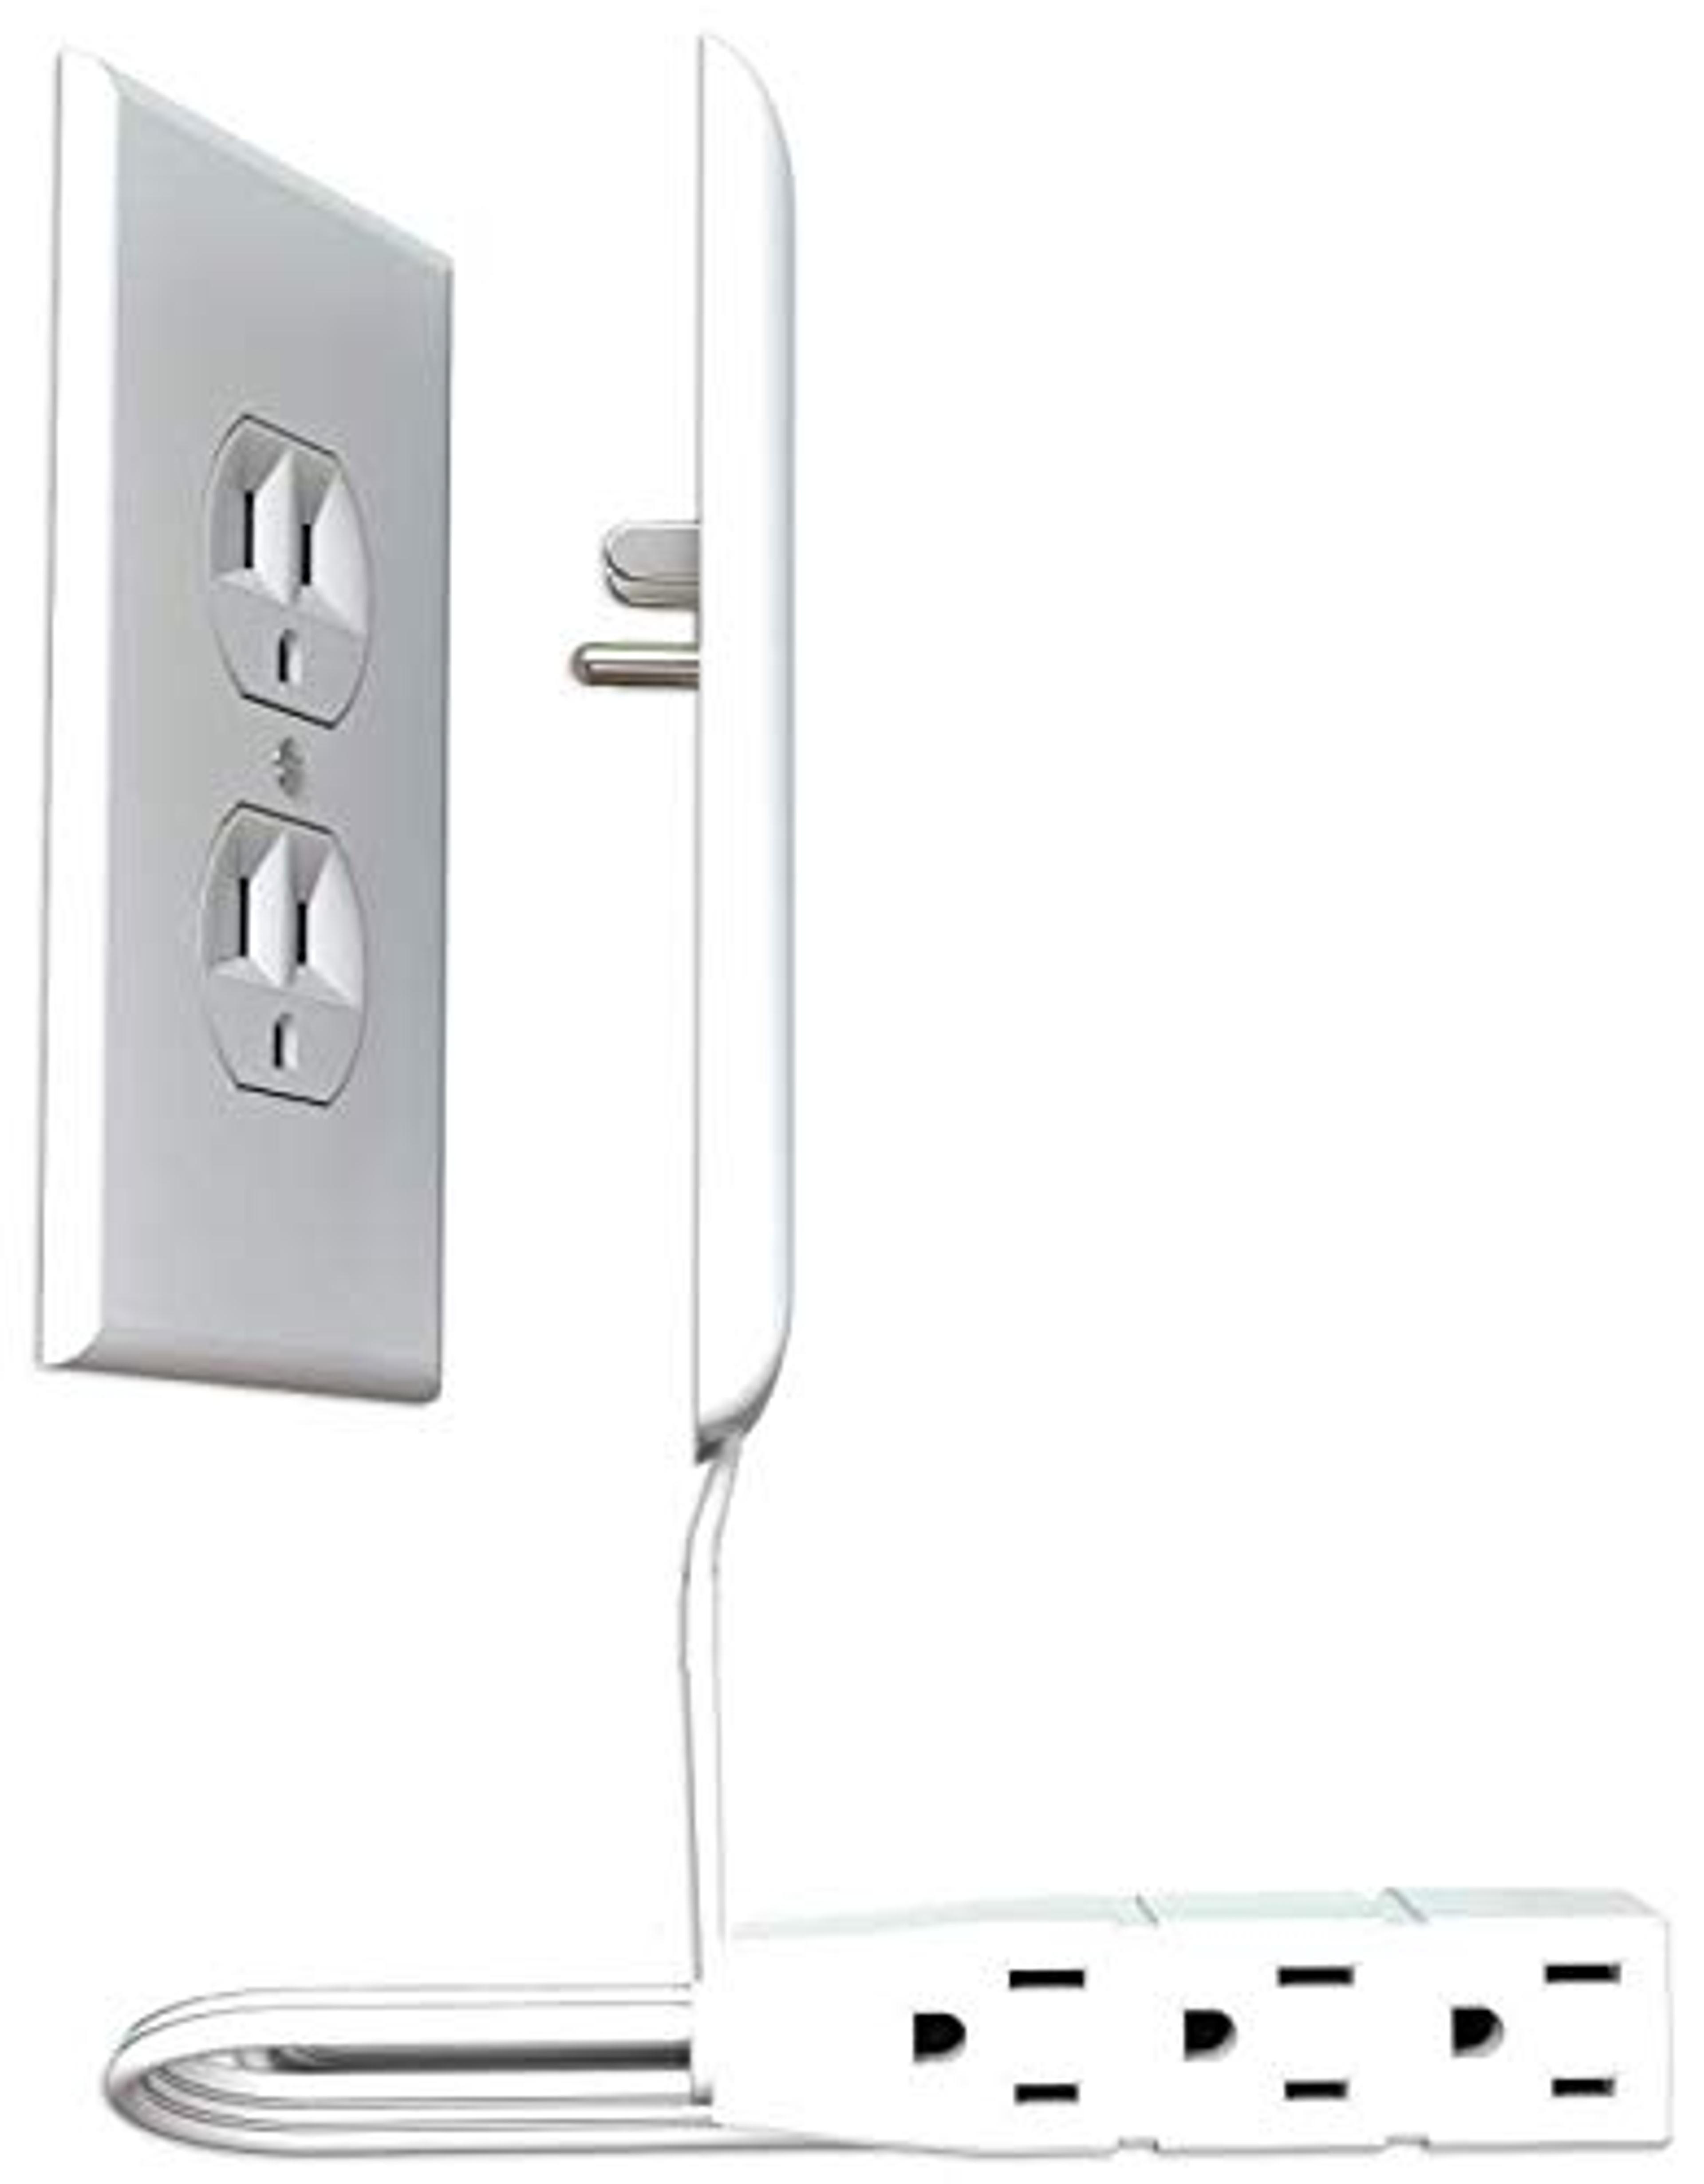 Sleek Socket Ultra-Thin Electrical Outlet Cover with 3 Outlet Power Strip and Cord Management Kit, 3-Foot, Universal Size 3 ft Flagship